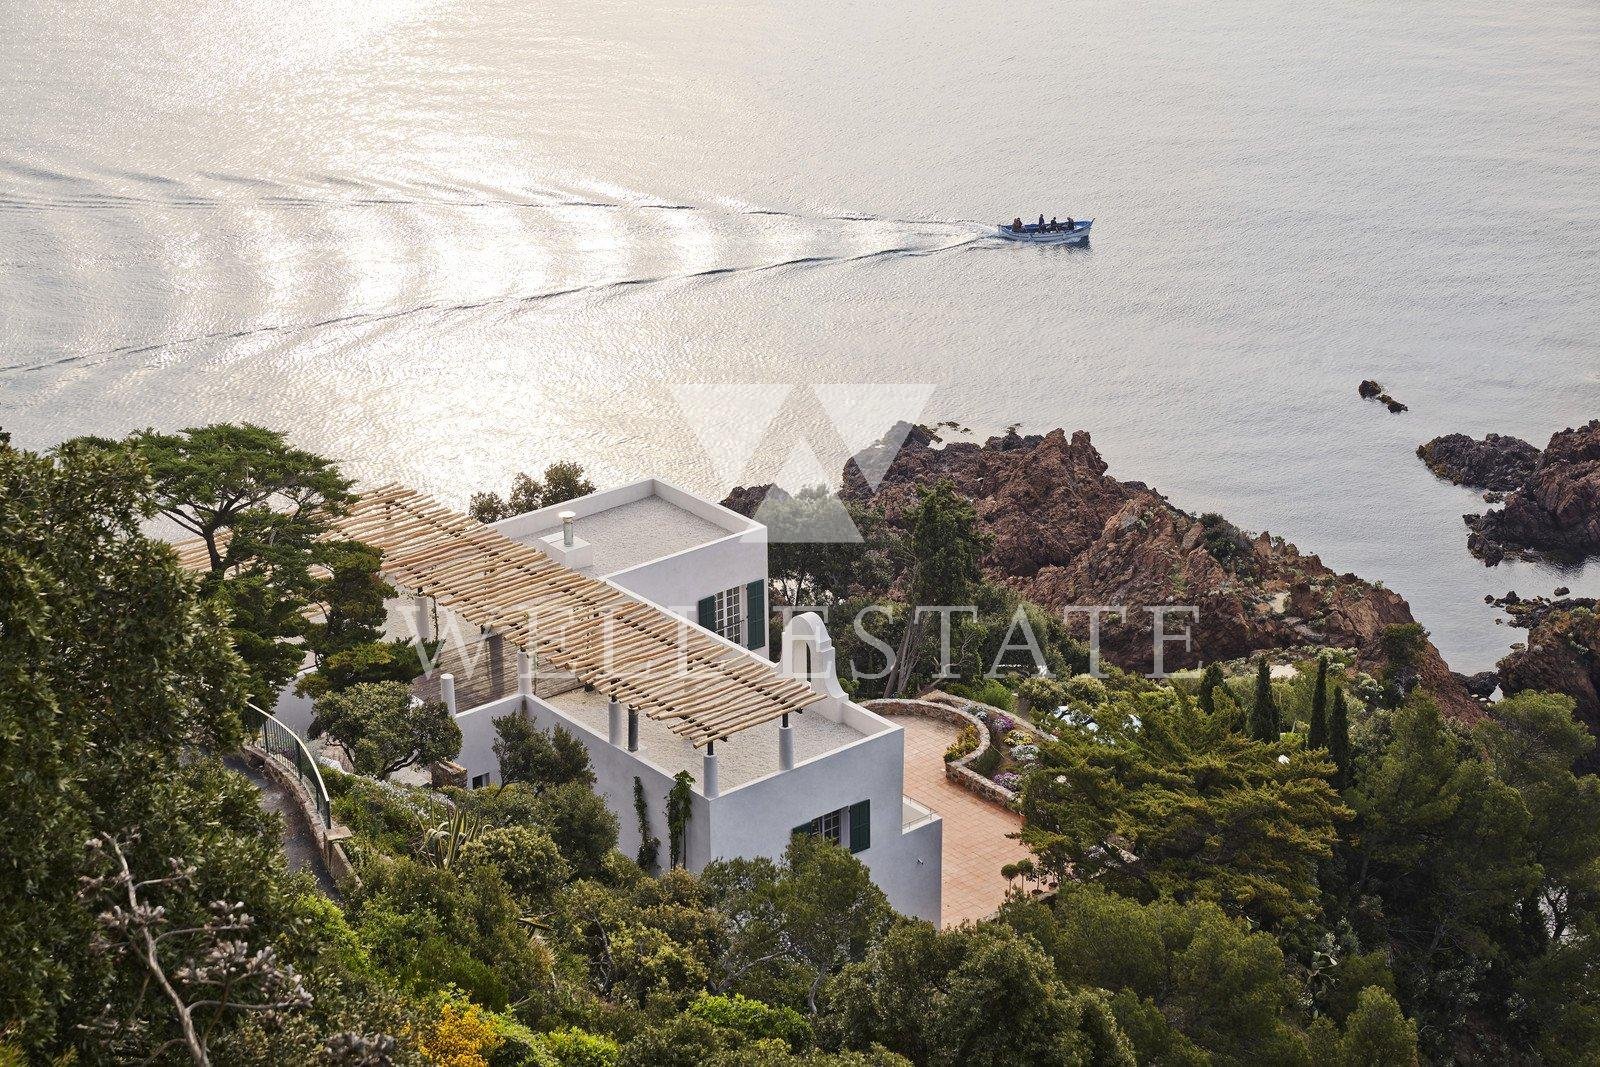 FOR RENT THEOULE SUR MER ARCHITECT-DESIGNED BEACH FRONF VILLA 500M2 WITH SWIMMING POOL ON A PLOT OF 6000 M2